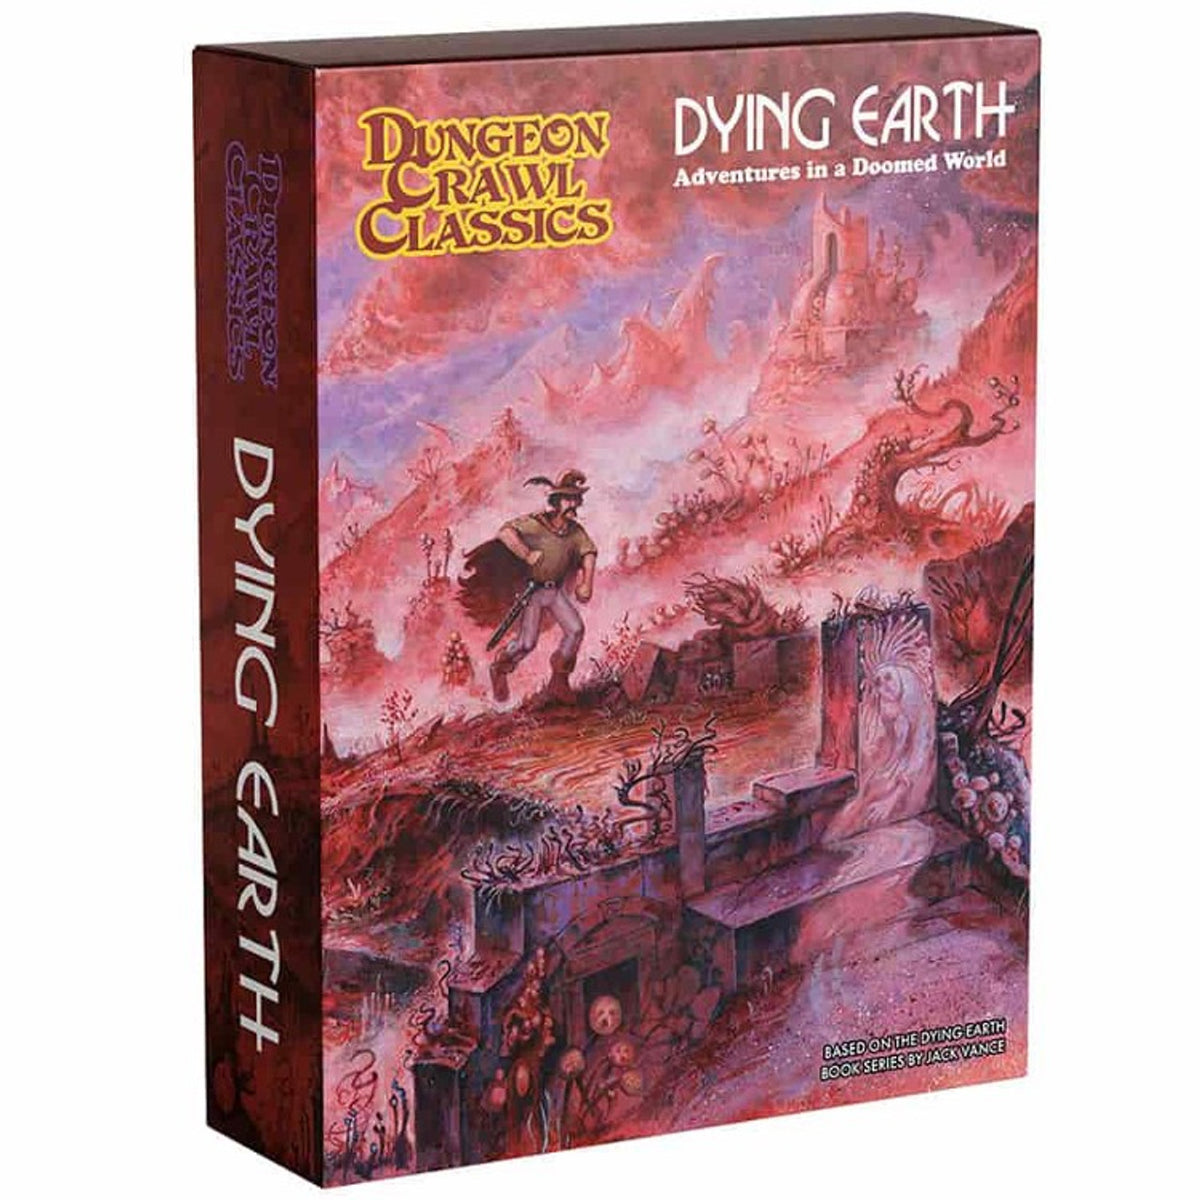 Dying Earth, Adventures in a Doomed World box set